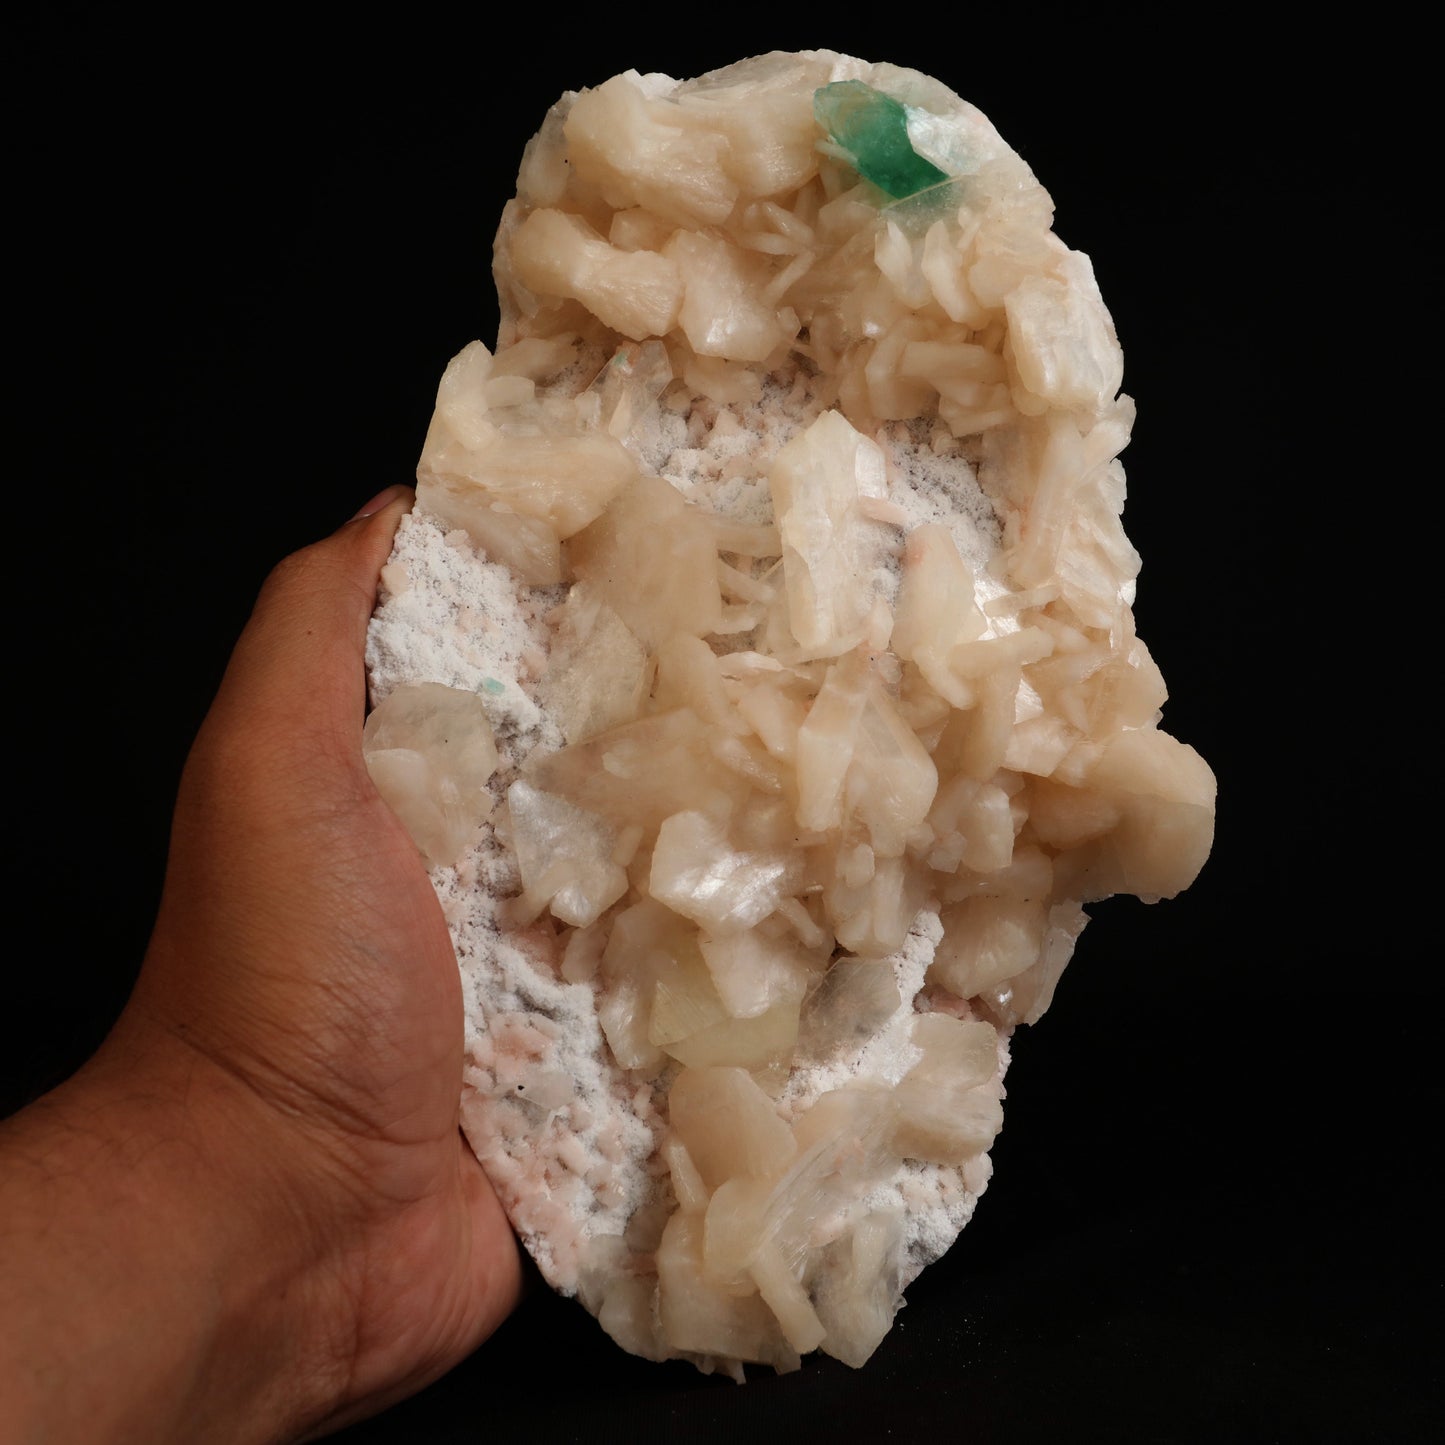 Powellite with Green Apophyllite Stilbite (Rare Find) Natural Mineral …  https://www.superbminerals.us/products/powellite-with-green-apophyllite-stilbite-rare-find-natural-mineral-specimen-b-5013  Features:&nbsp;We have a striking crystal perched elegantly in apophyllite and stilbite crystal nests that are elongated and dramatic! This is a noteworthy specimen in terms of the powellite's own size and the combination's overall appearance. The crystal is a double-terminated, transparent, satiny powellite 